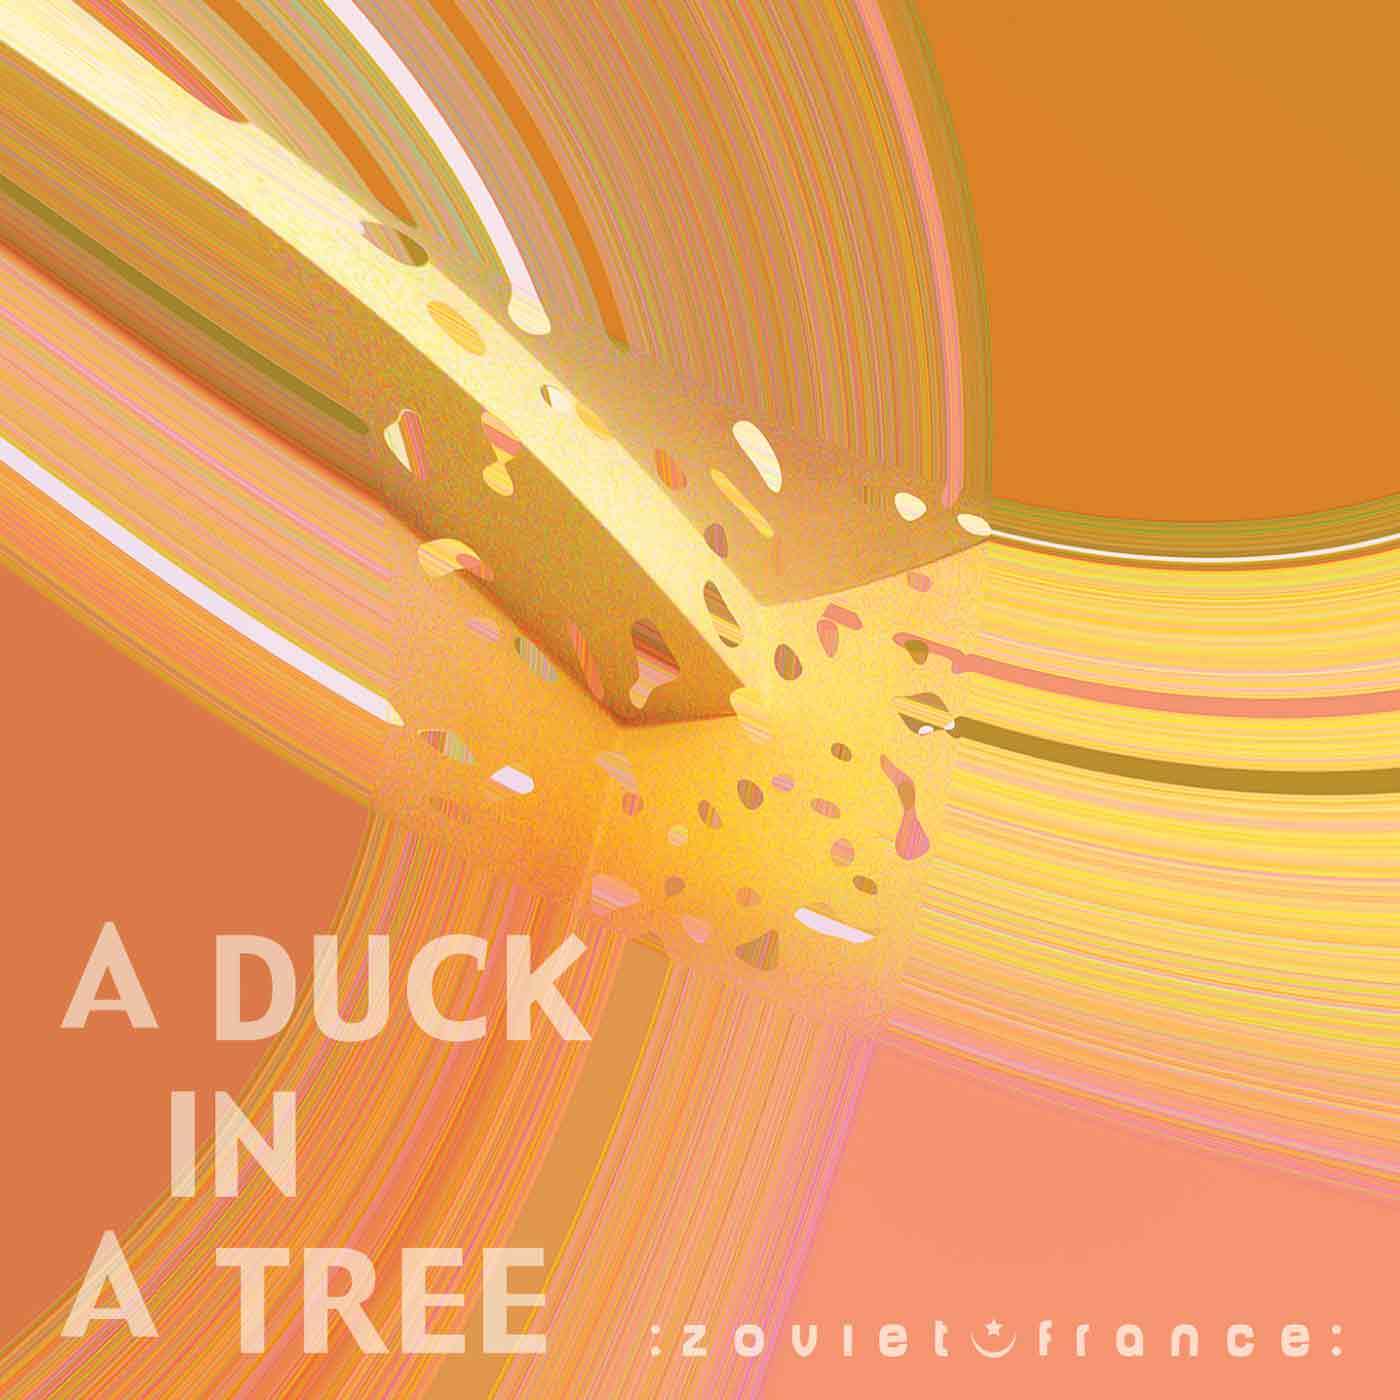 A-Duck-in-a-Tree-2013-04-13-_-Carved-into-Roses-layout-1400.jpg